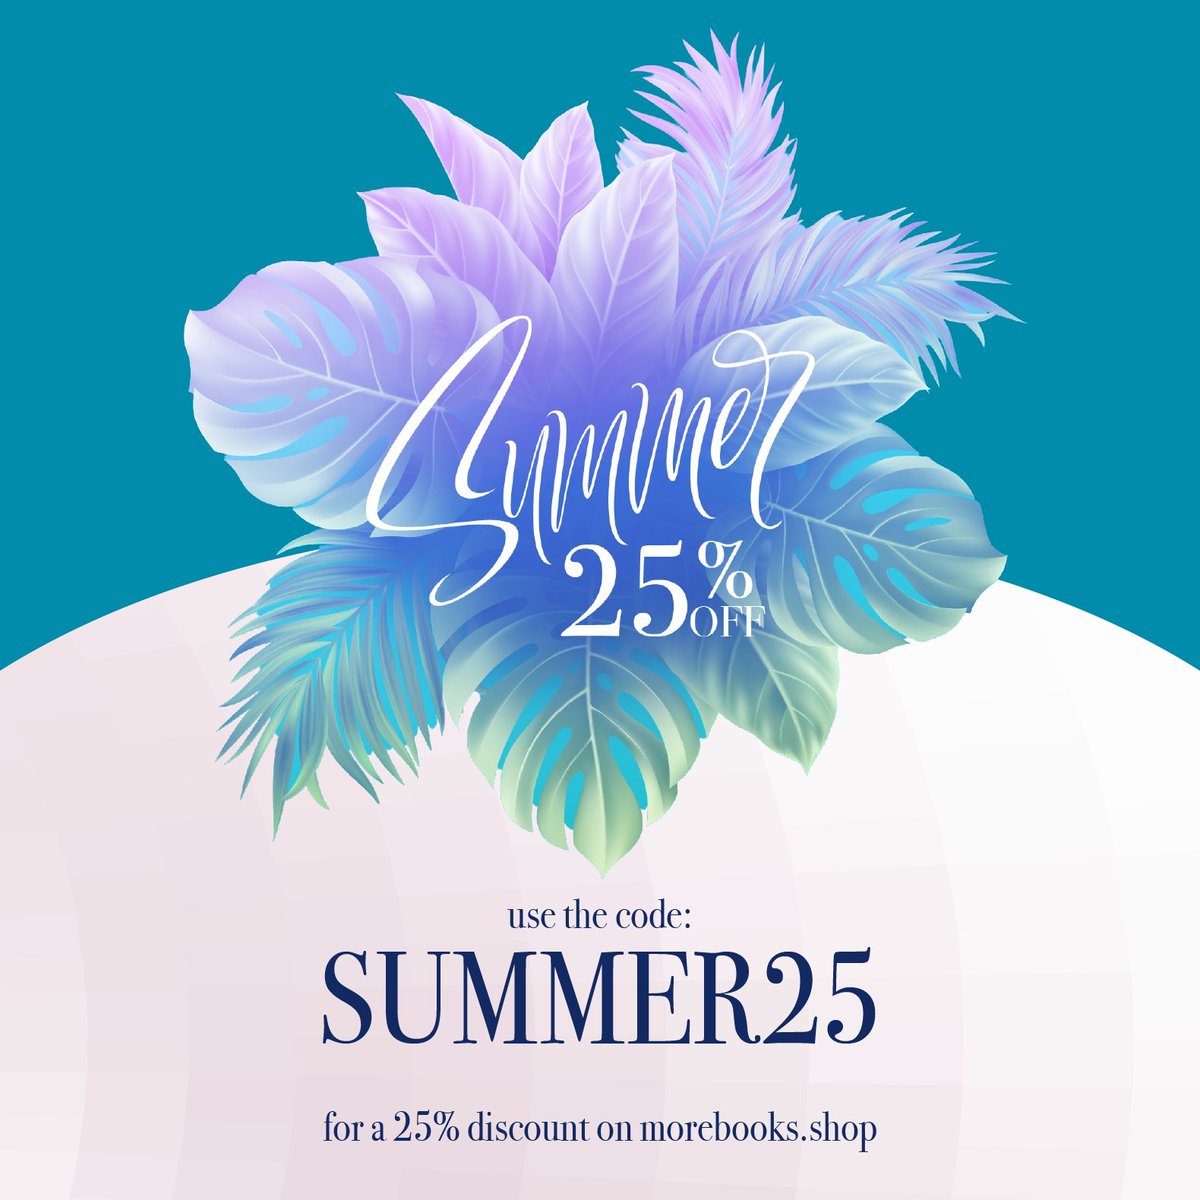 👋 Hello Friends! Glad to announce the start of our ☀️ Summer Campaign! Use the code SUMMER25 for a 25% discount on 🌐 morebooks.shop Don't miss this opportunity! Hurry up the offer is only valid till 12.07.2022 #summer #campaign #discounts